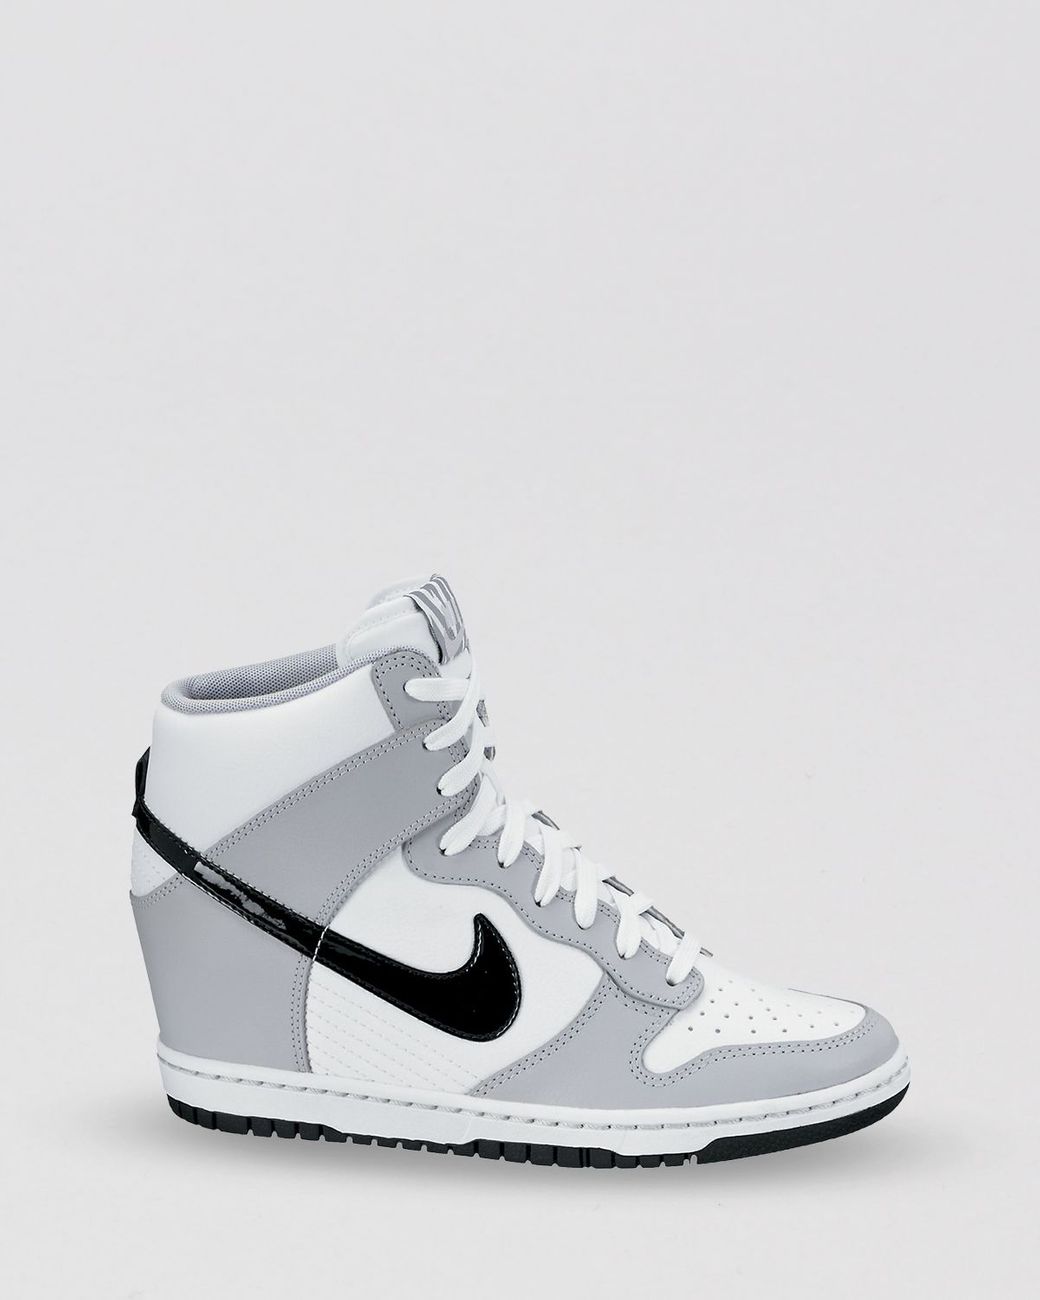 Nike Lace Up High Top Wedge Sneakers - Women'S Dunk Sky Hi in Gray | Lyst